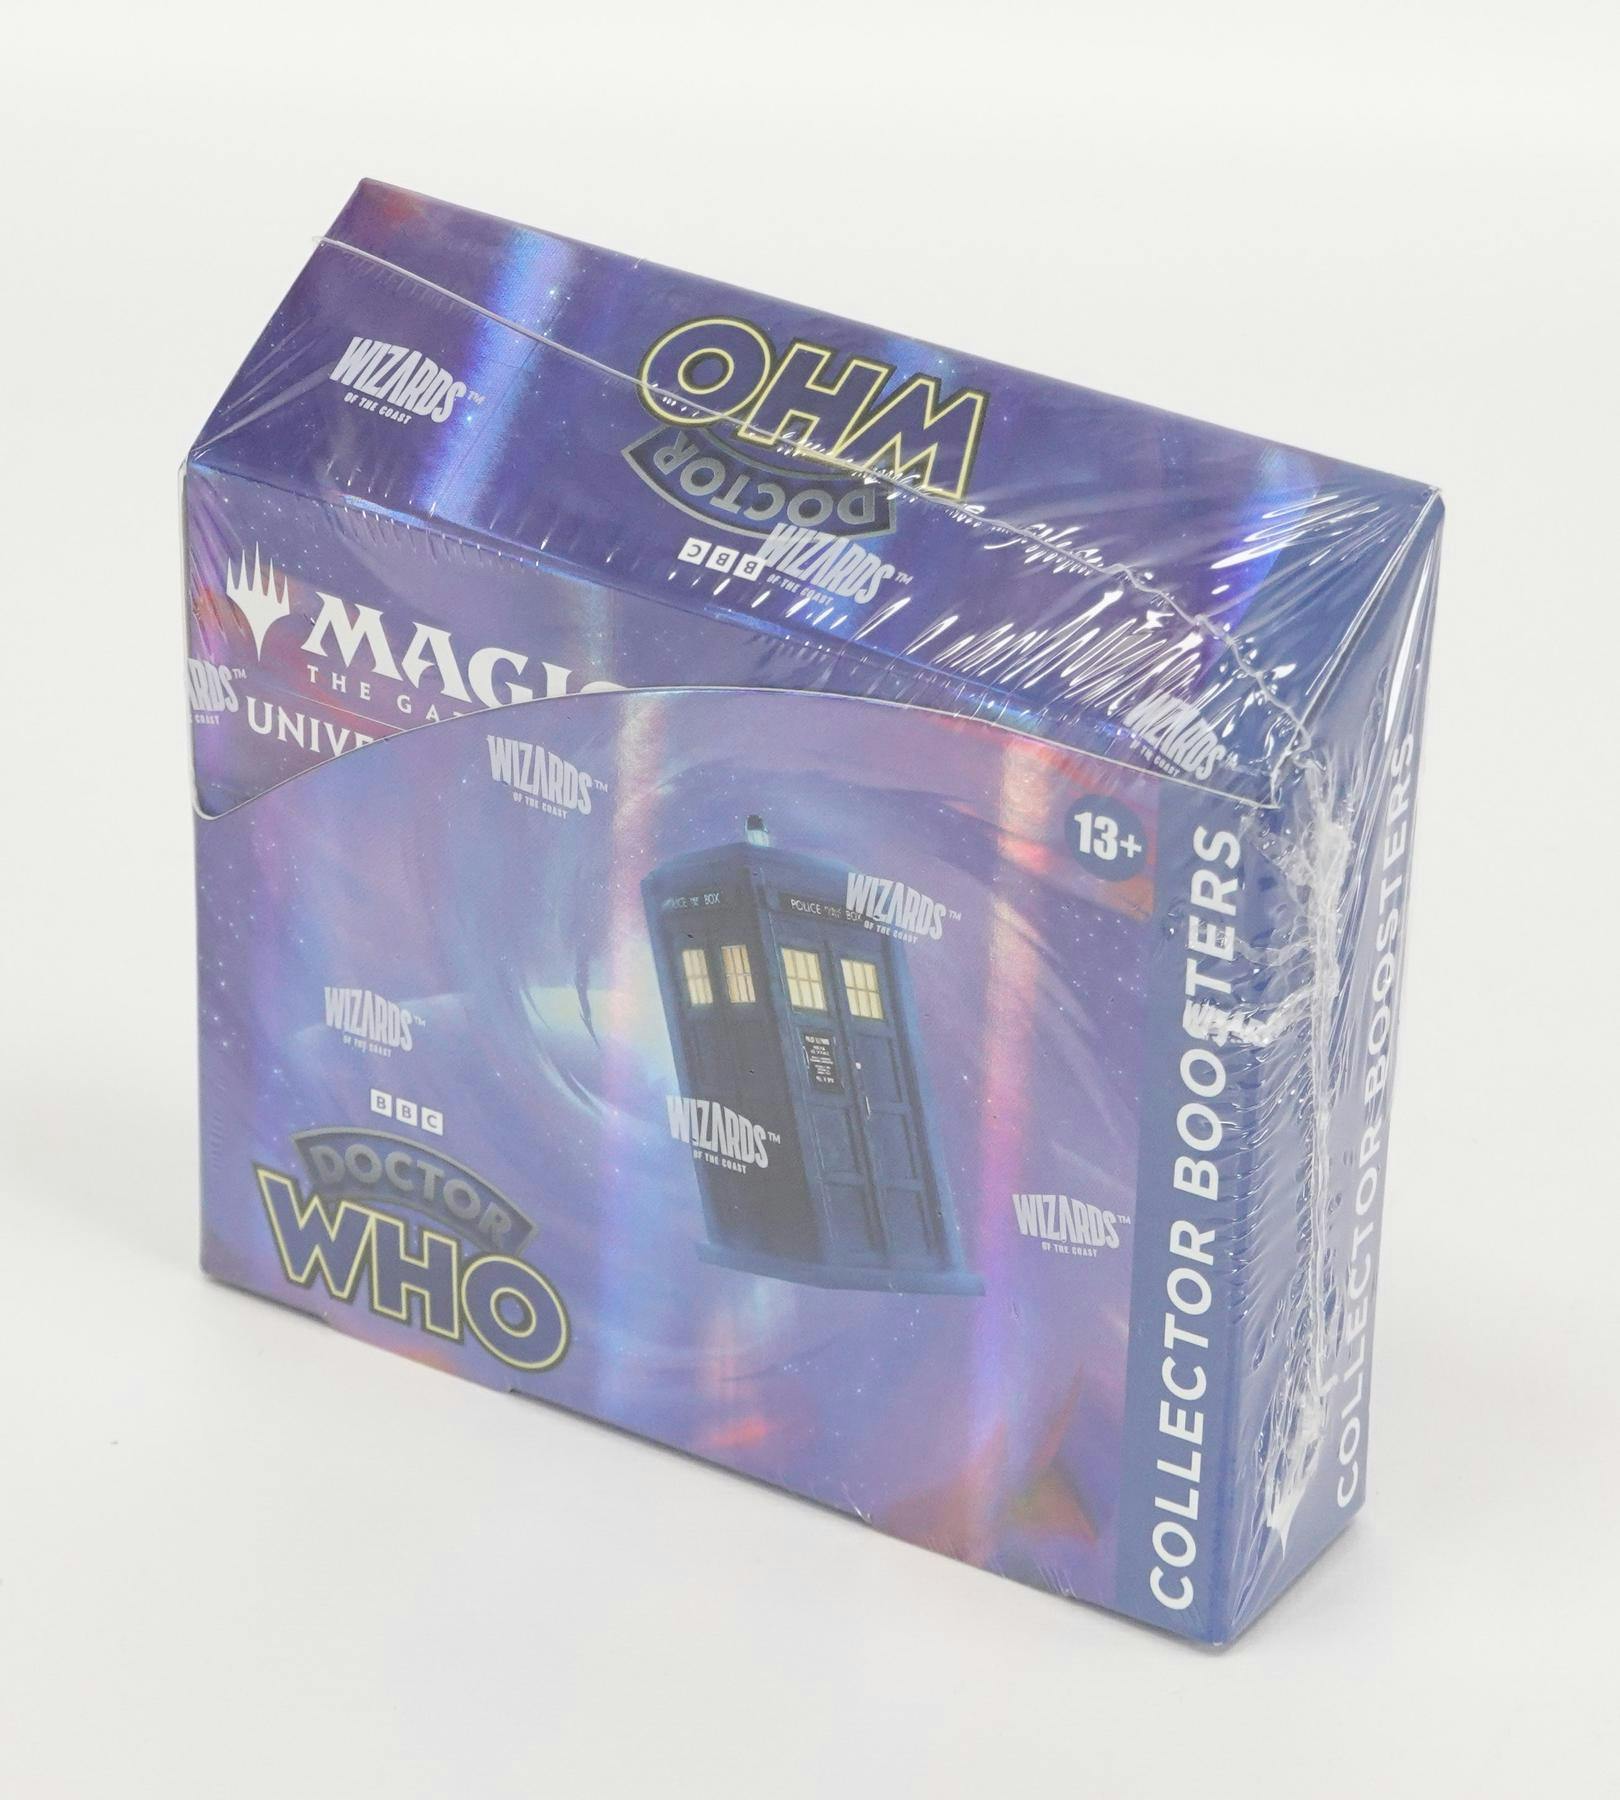  Magic The Gathering – Doctor Who Collector Booster Box